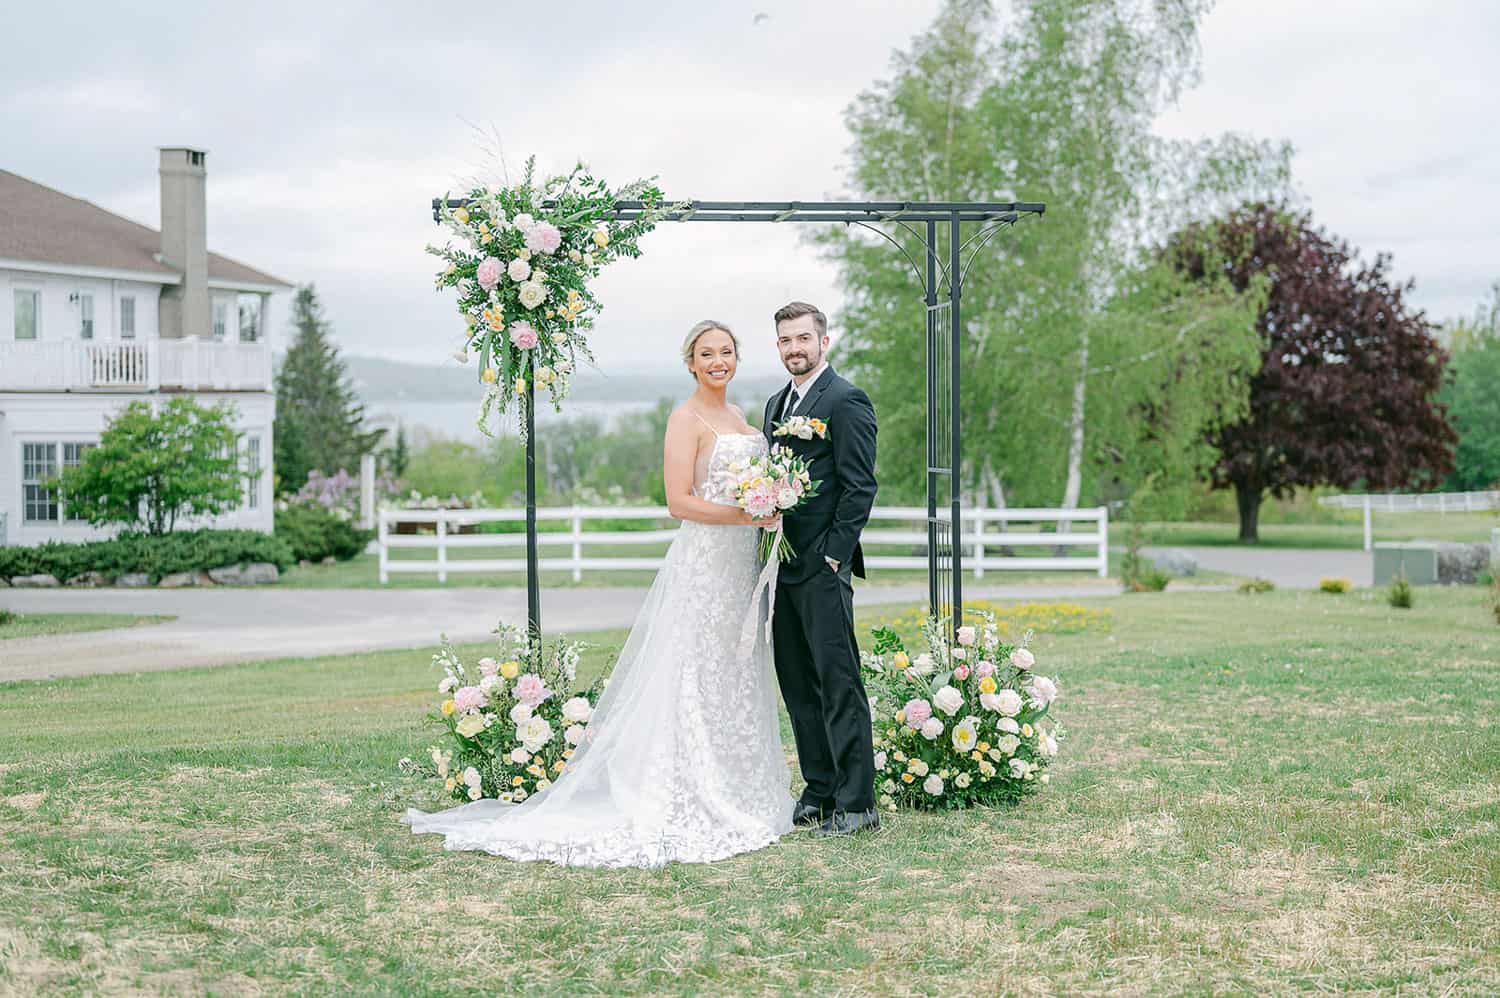 A bride with a bouquet and a groom smiling under a floral arch in a field, with a house in the background.